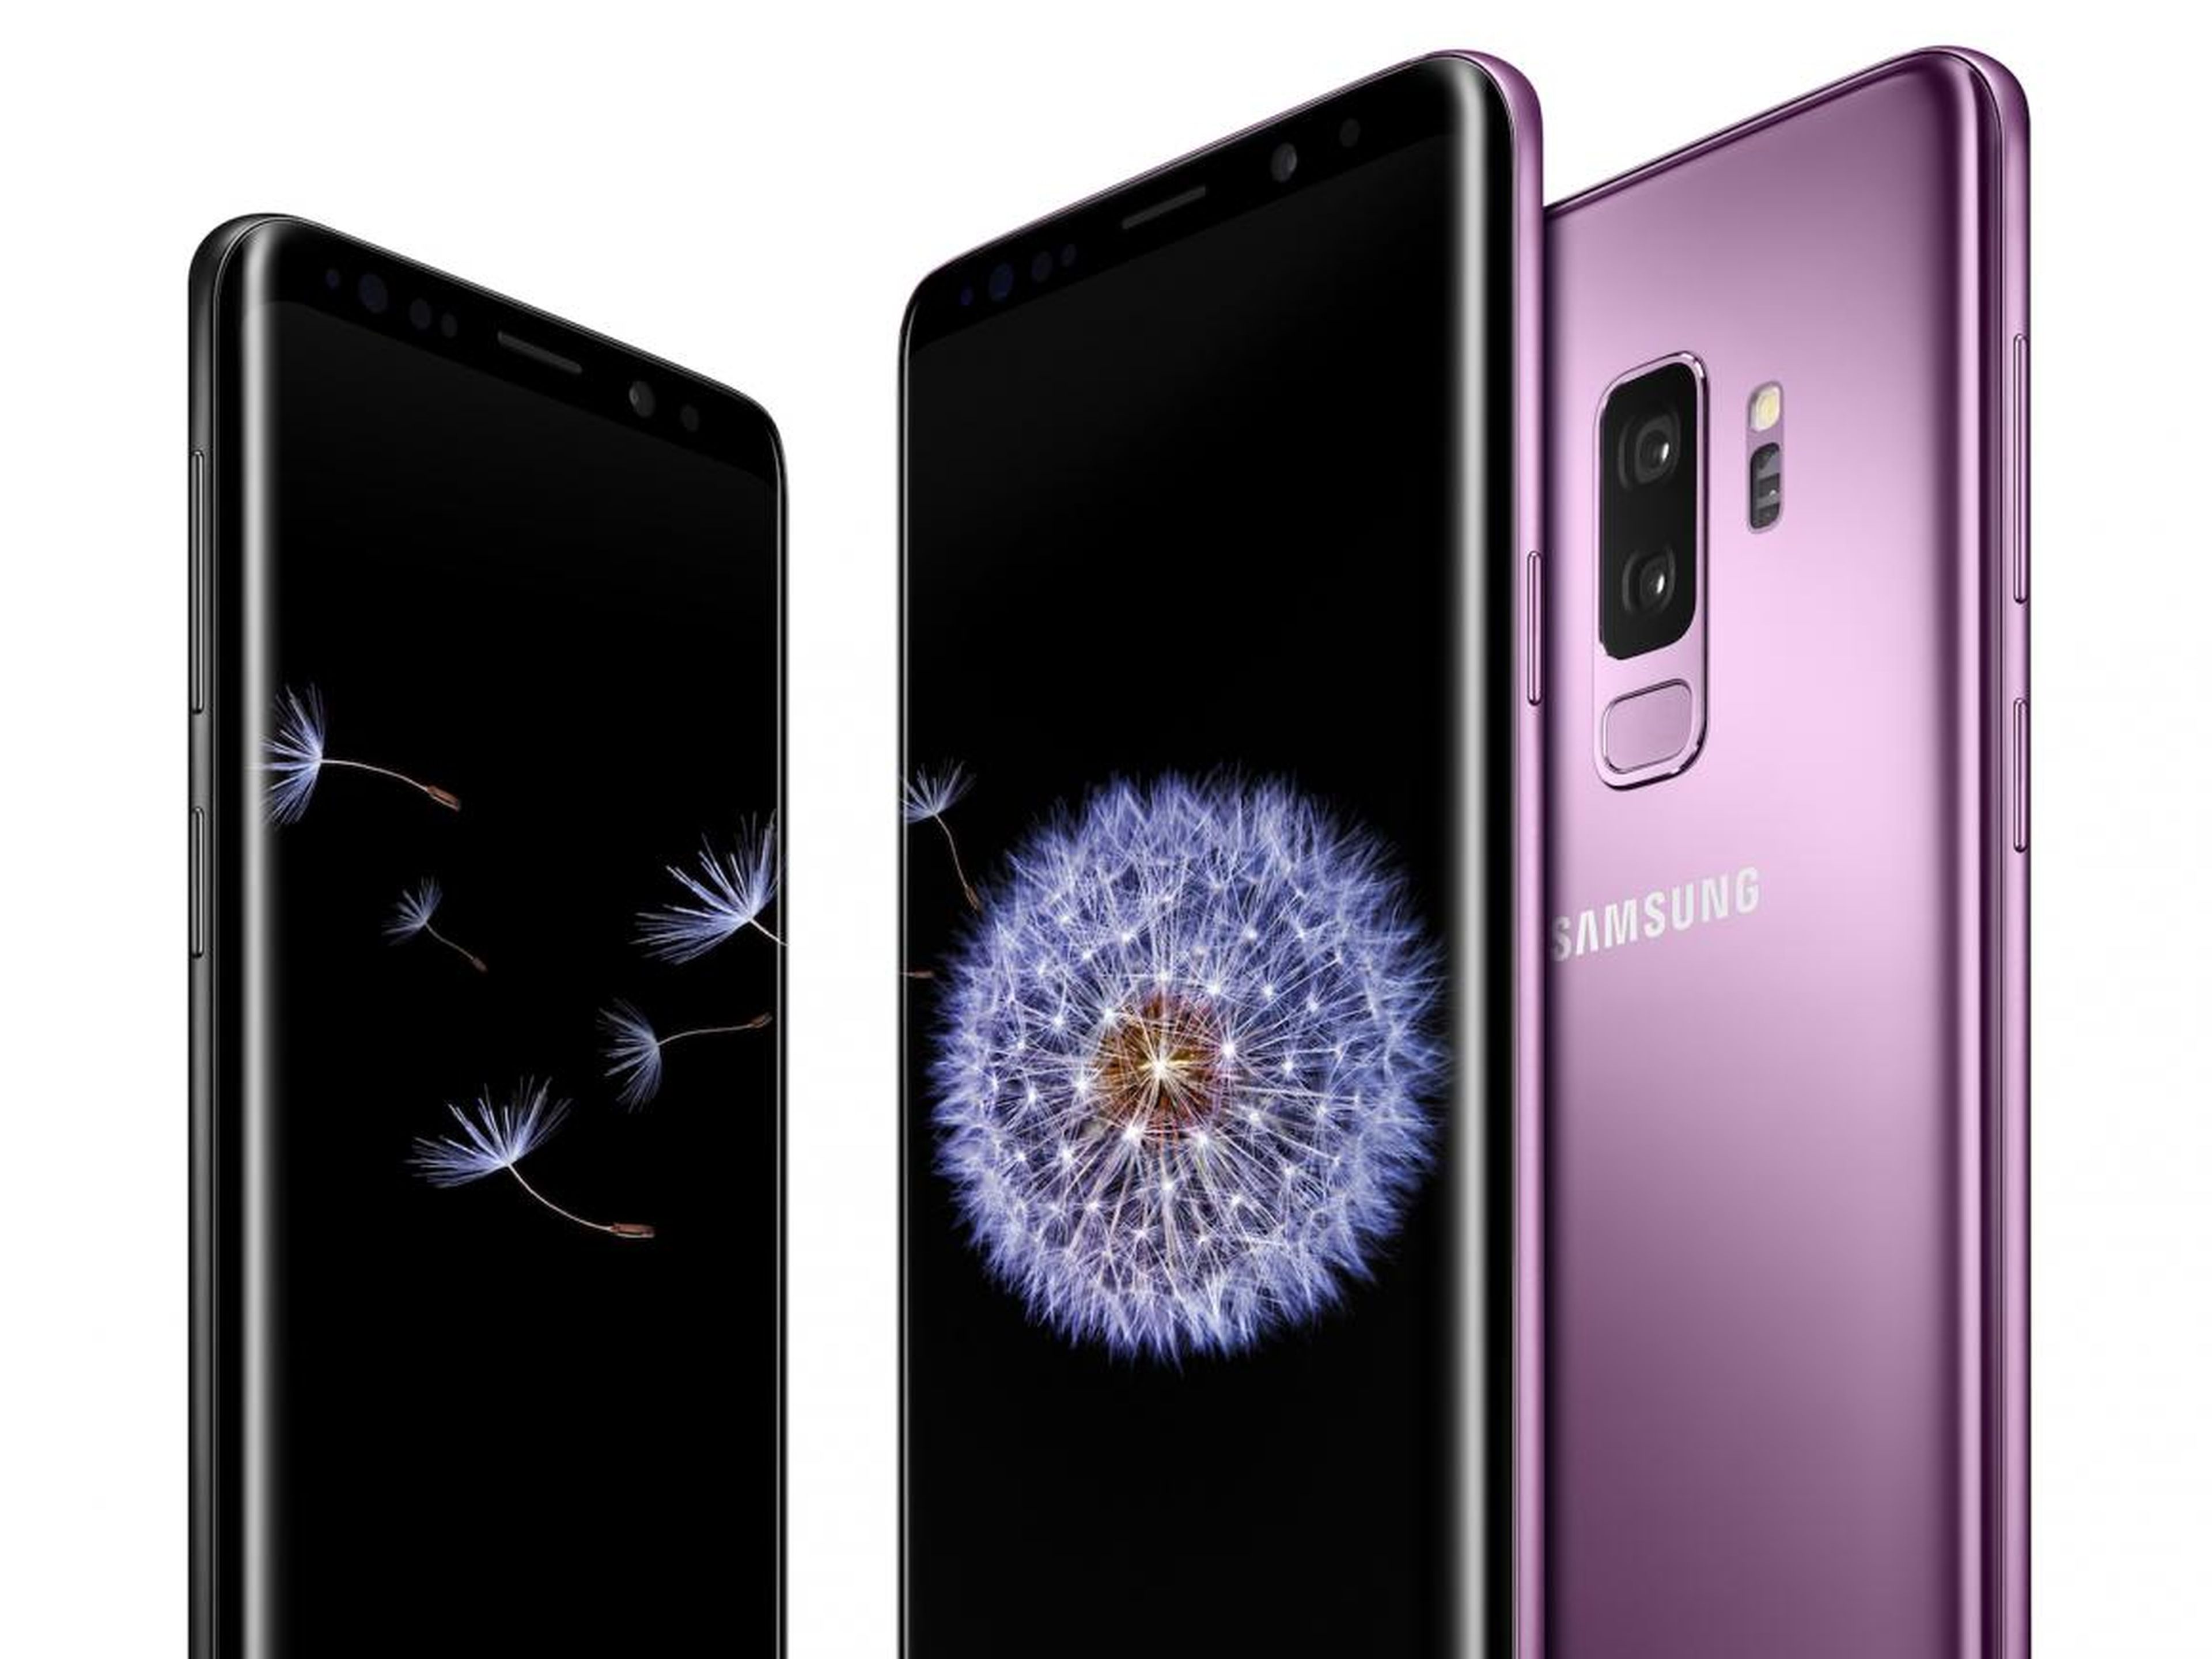 There could be three different Galaxy S10 models.